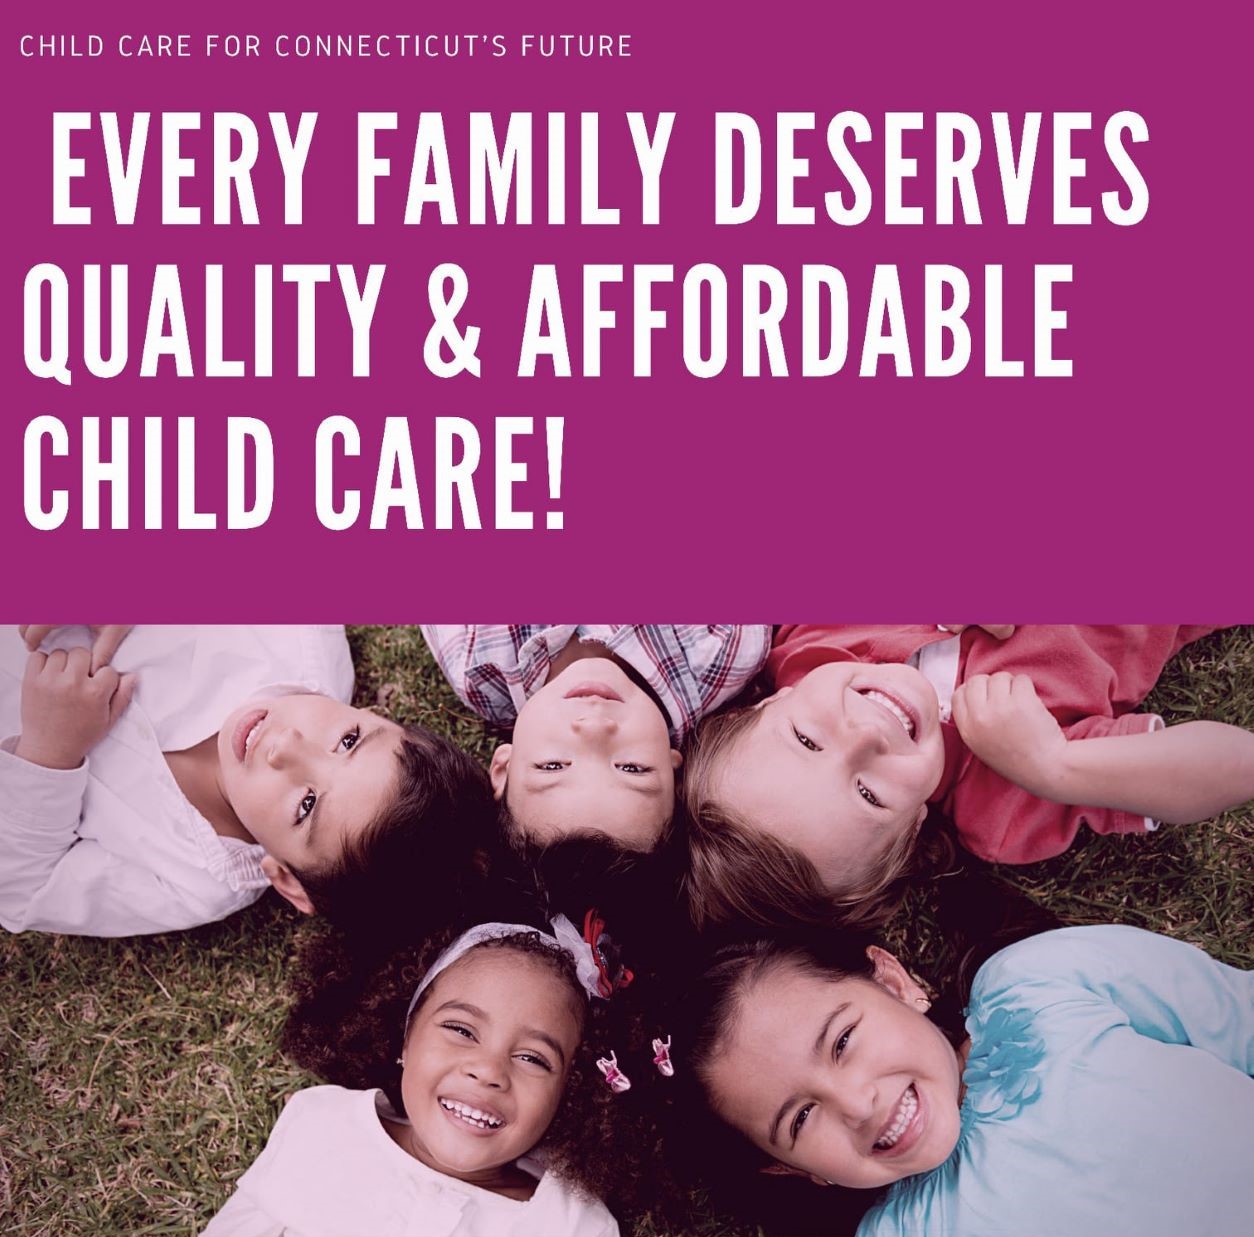 New Coalition Pushes for Child Care Investments To Close Gaps